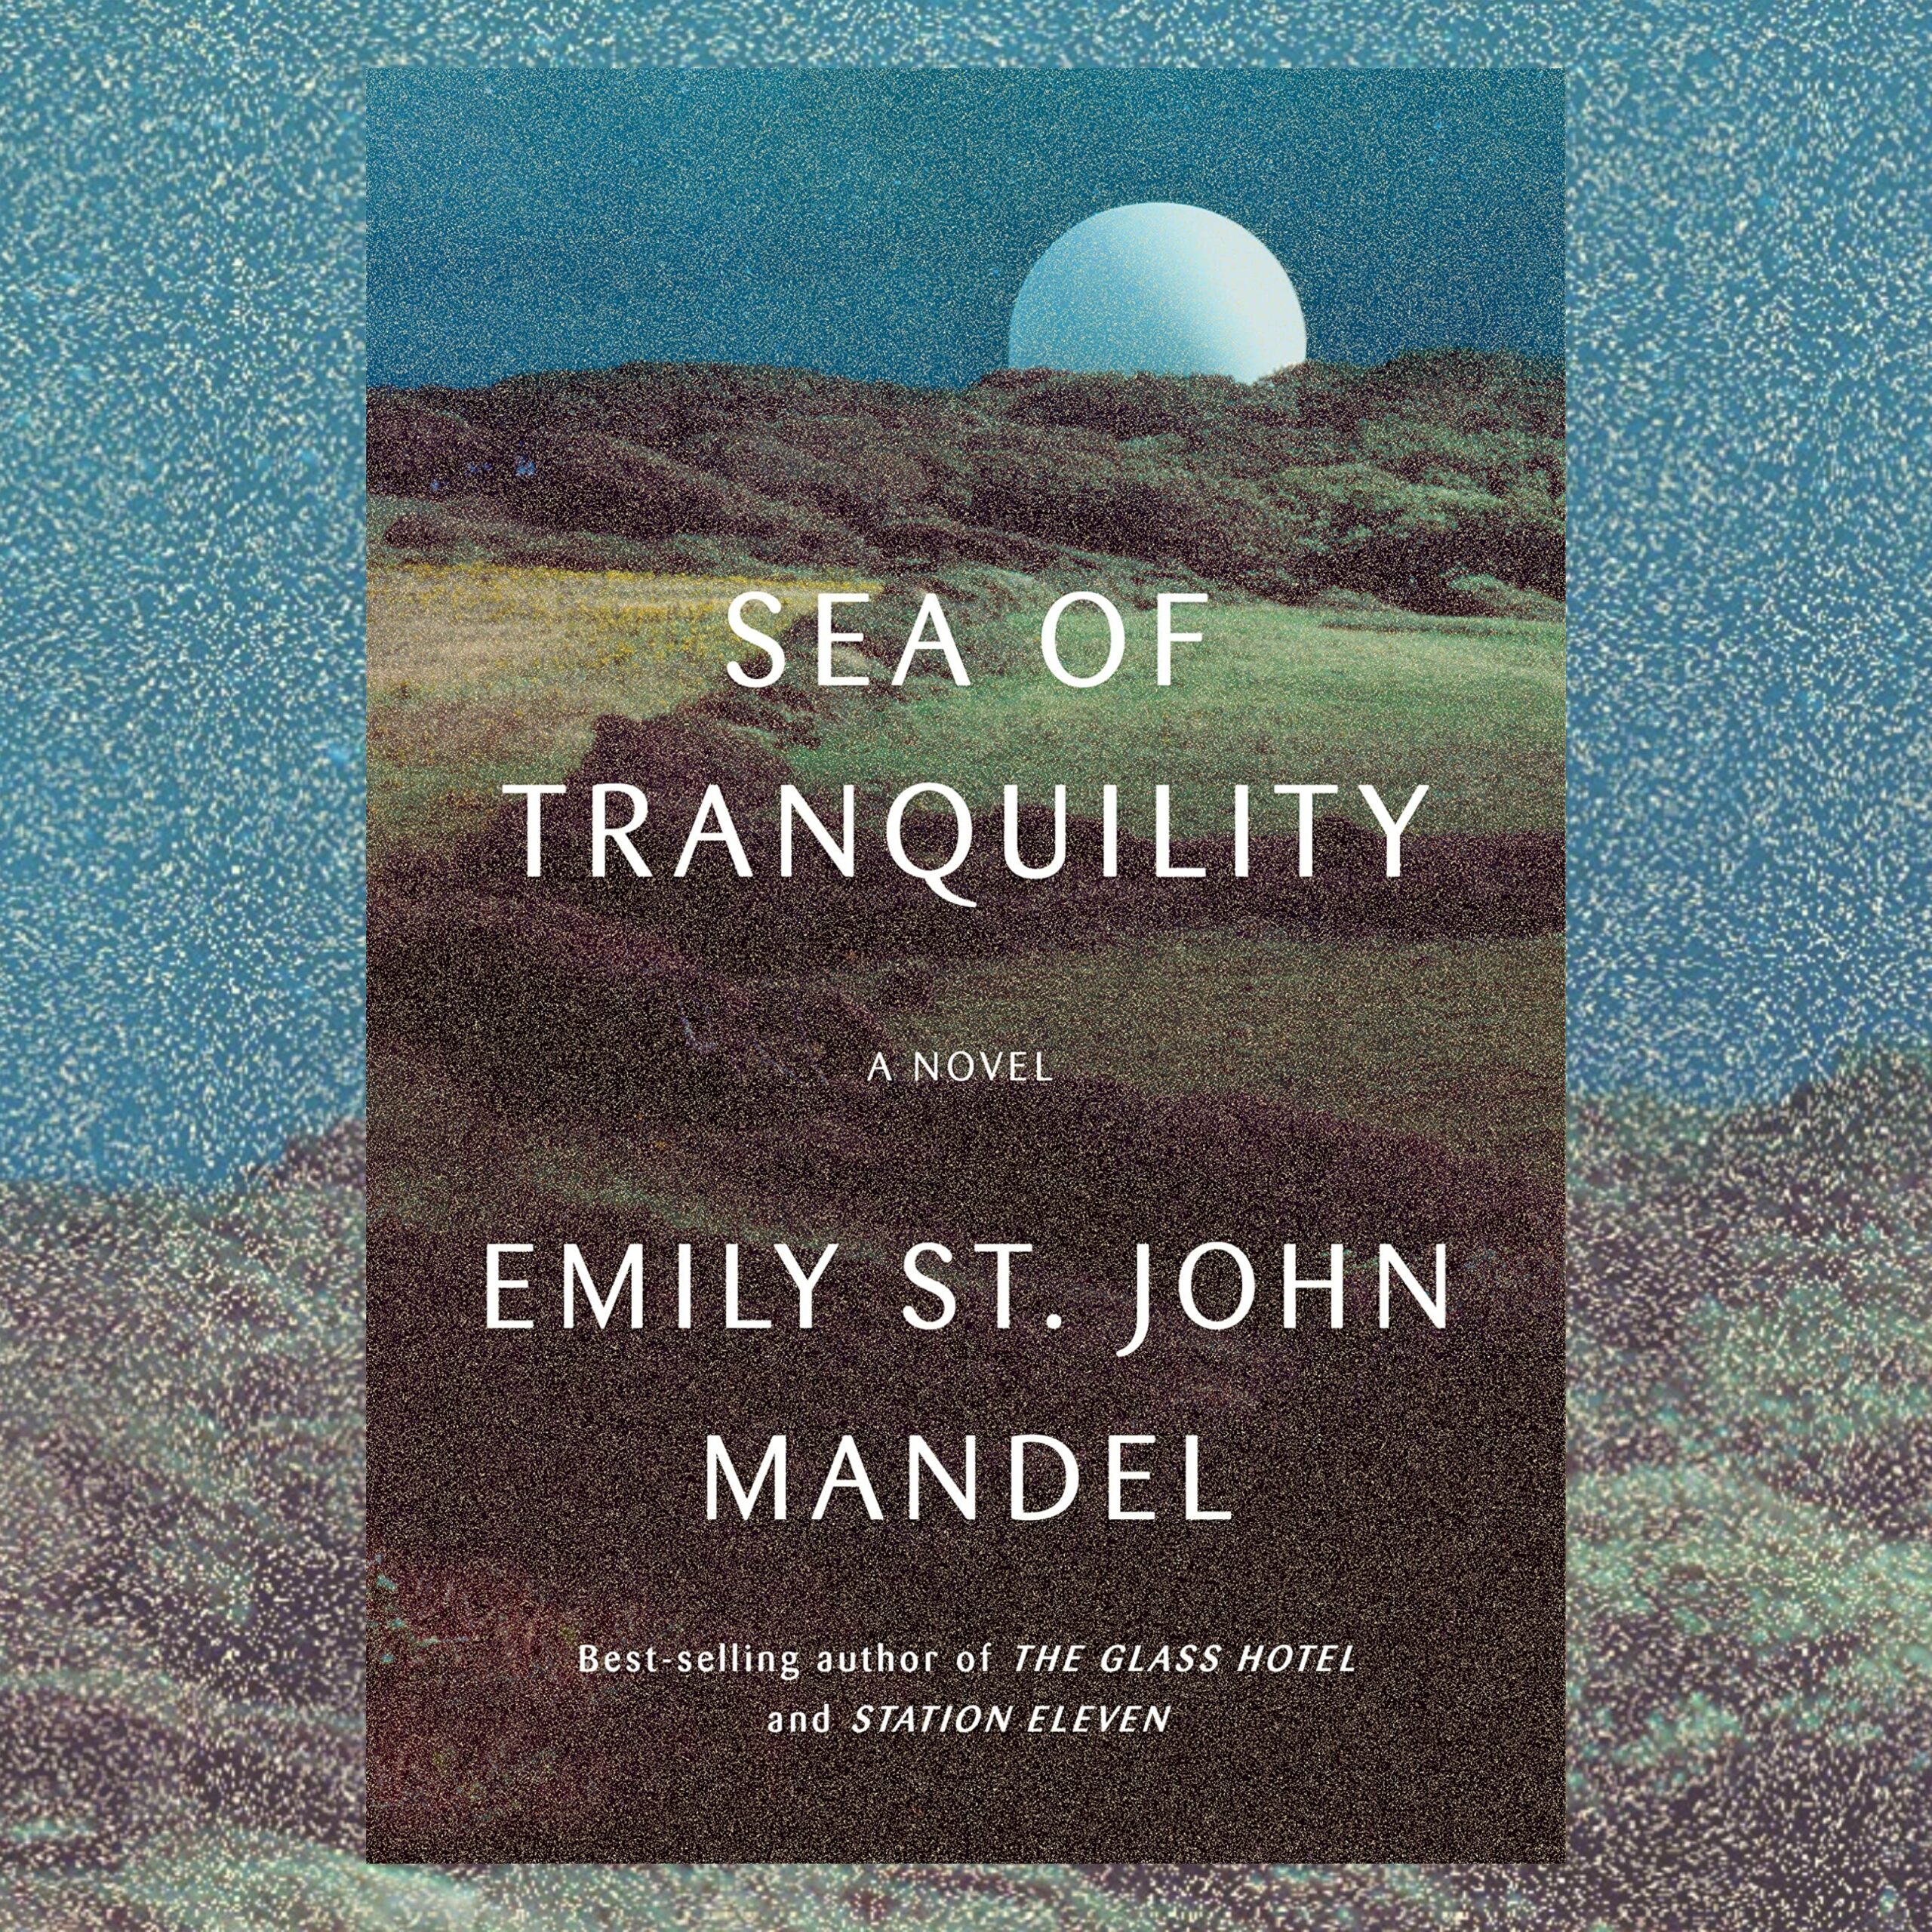 1797 - Emily St. John Mandel - Sea of Tranquility | The Book Show